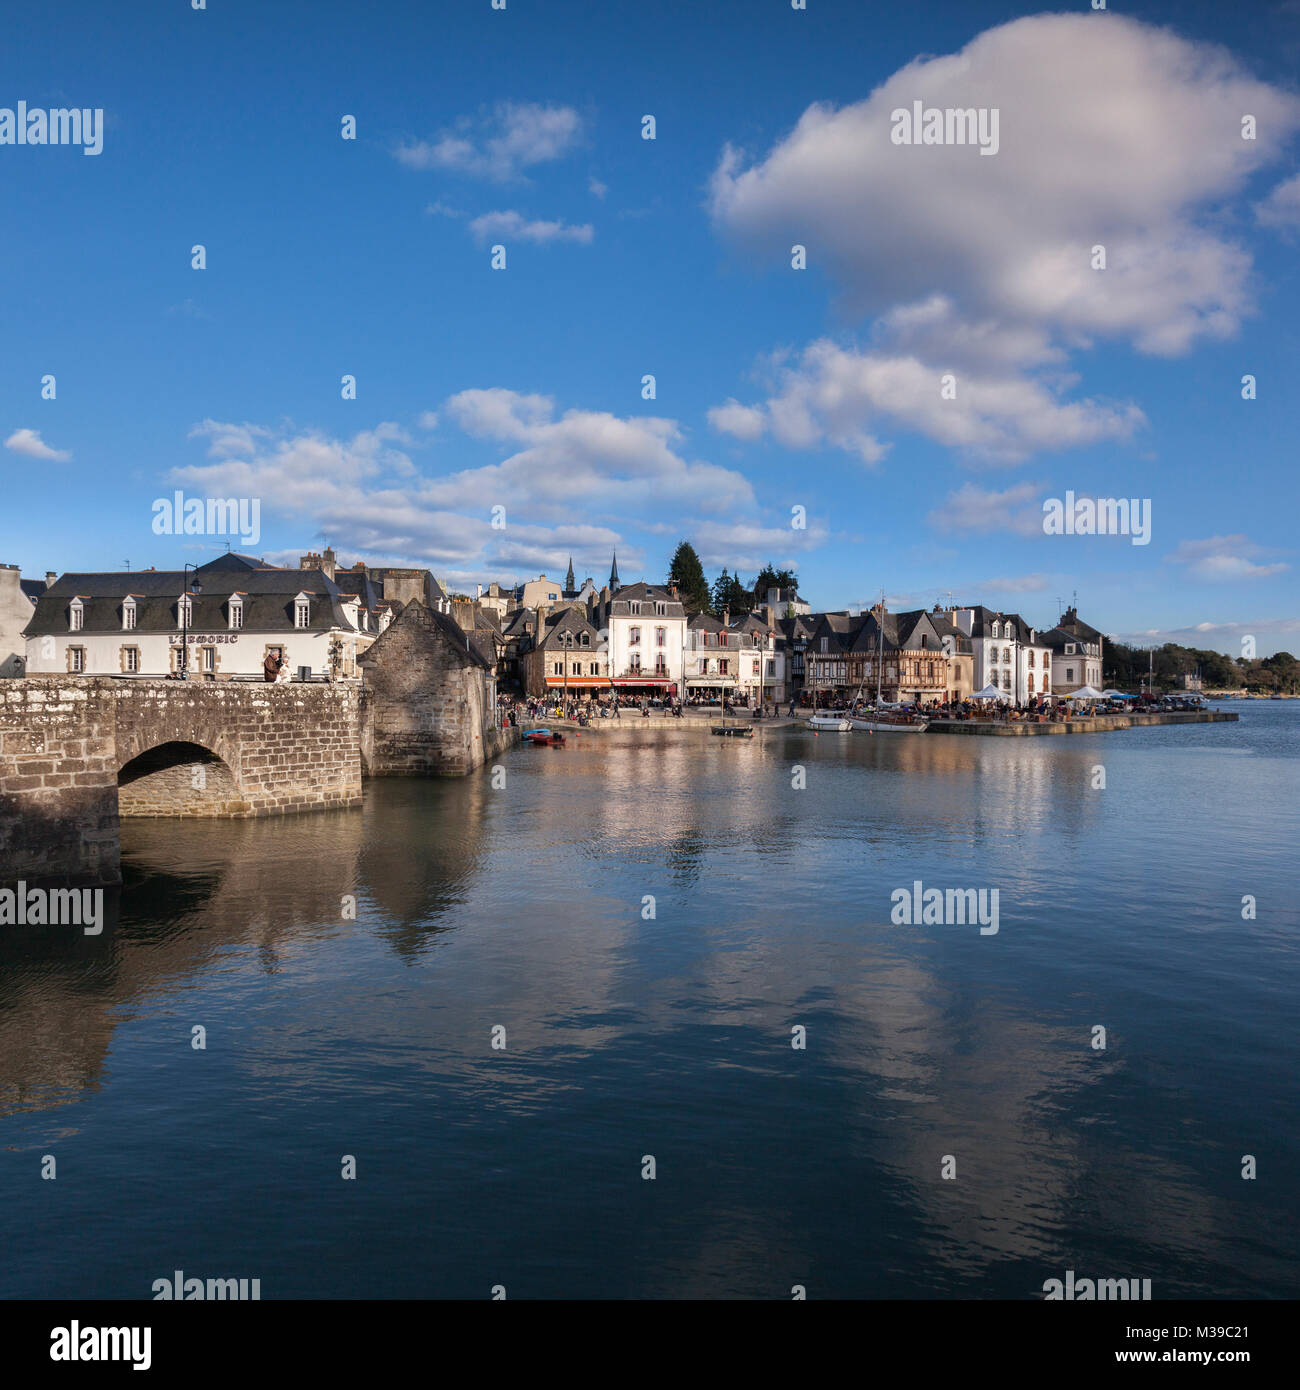 Saint-Goustan, Auray, Morbihan, Brittany, France. Saint-Goustan is the old town, the river is the Loch, the bridge is the Pont Saint-Goustan. Stock Photo